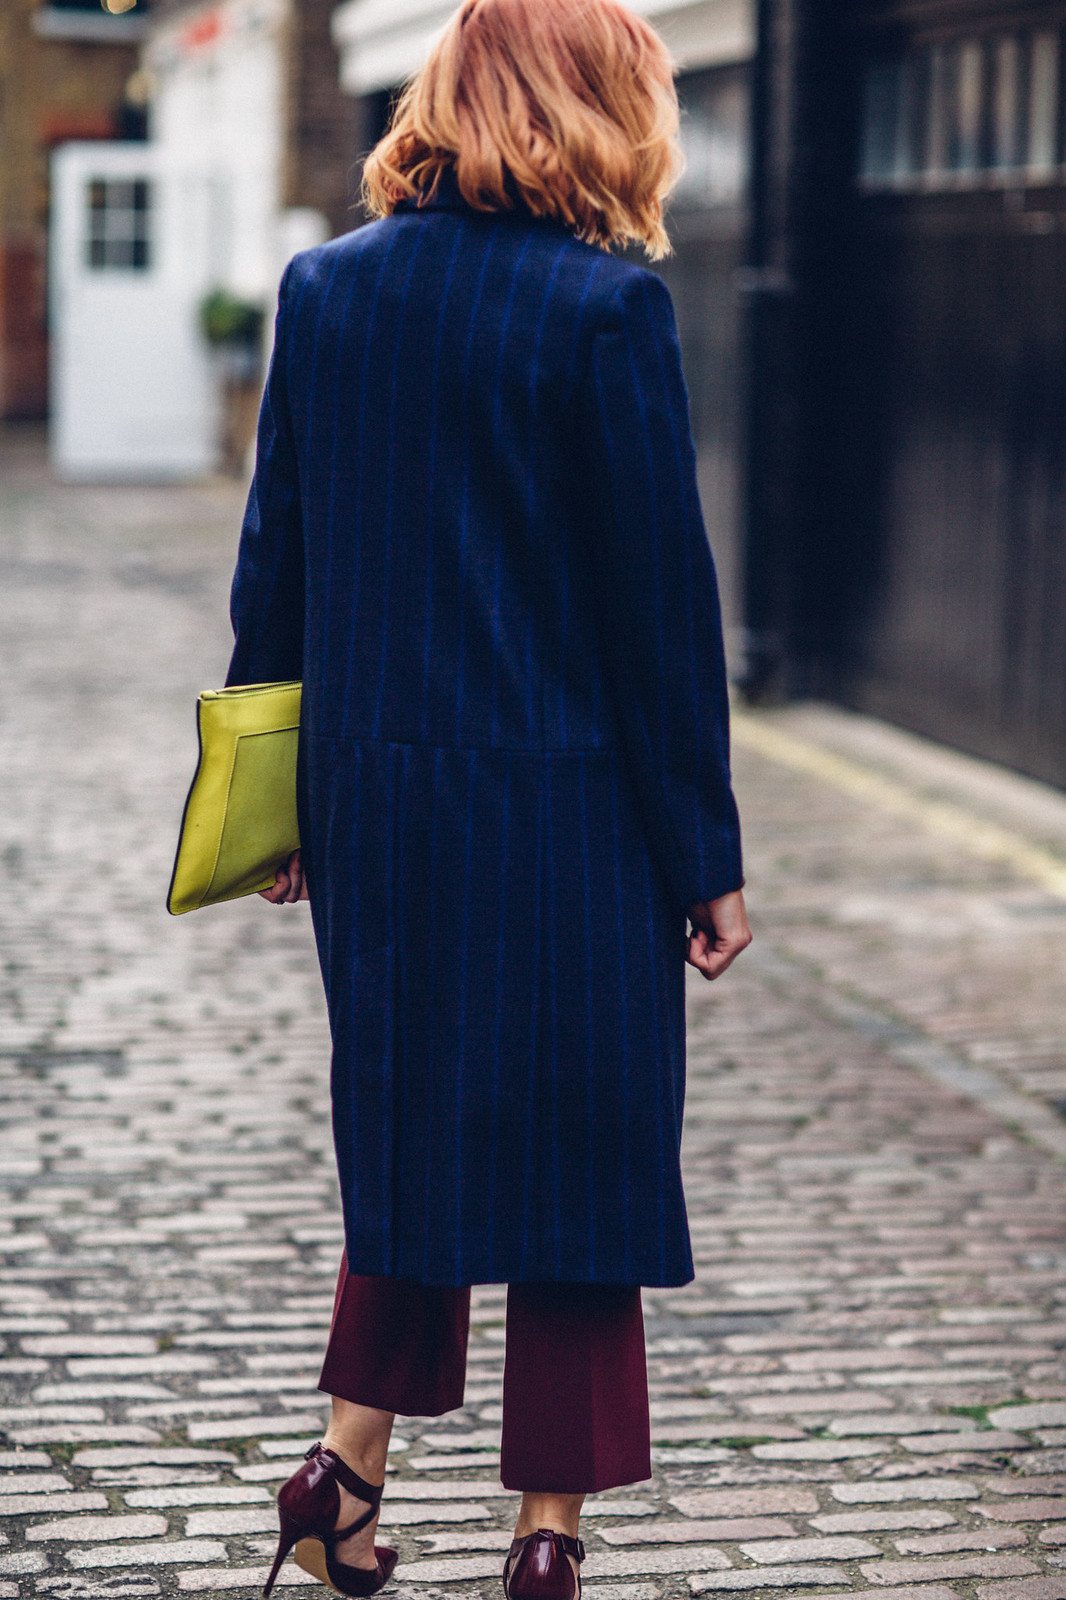 Bold jewel colours Autumn look fall outfit smart winter wear layering Jaeger Longline pinstripe coat, red roll neck, burgundy cocoon dress and cropped flares, yeloo suede clutch | Not Dressed As Lamb, over 40 style